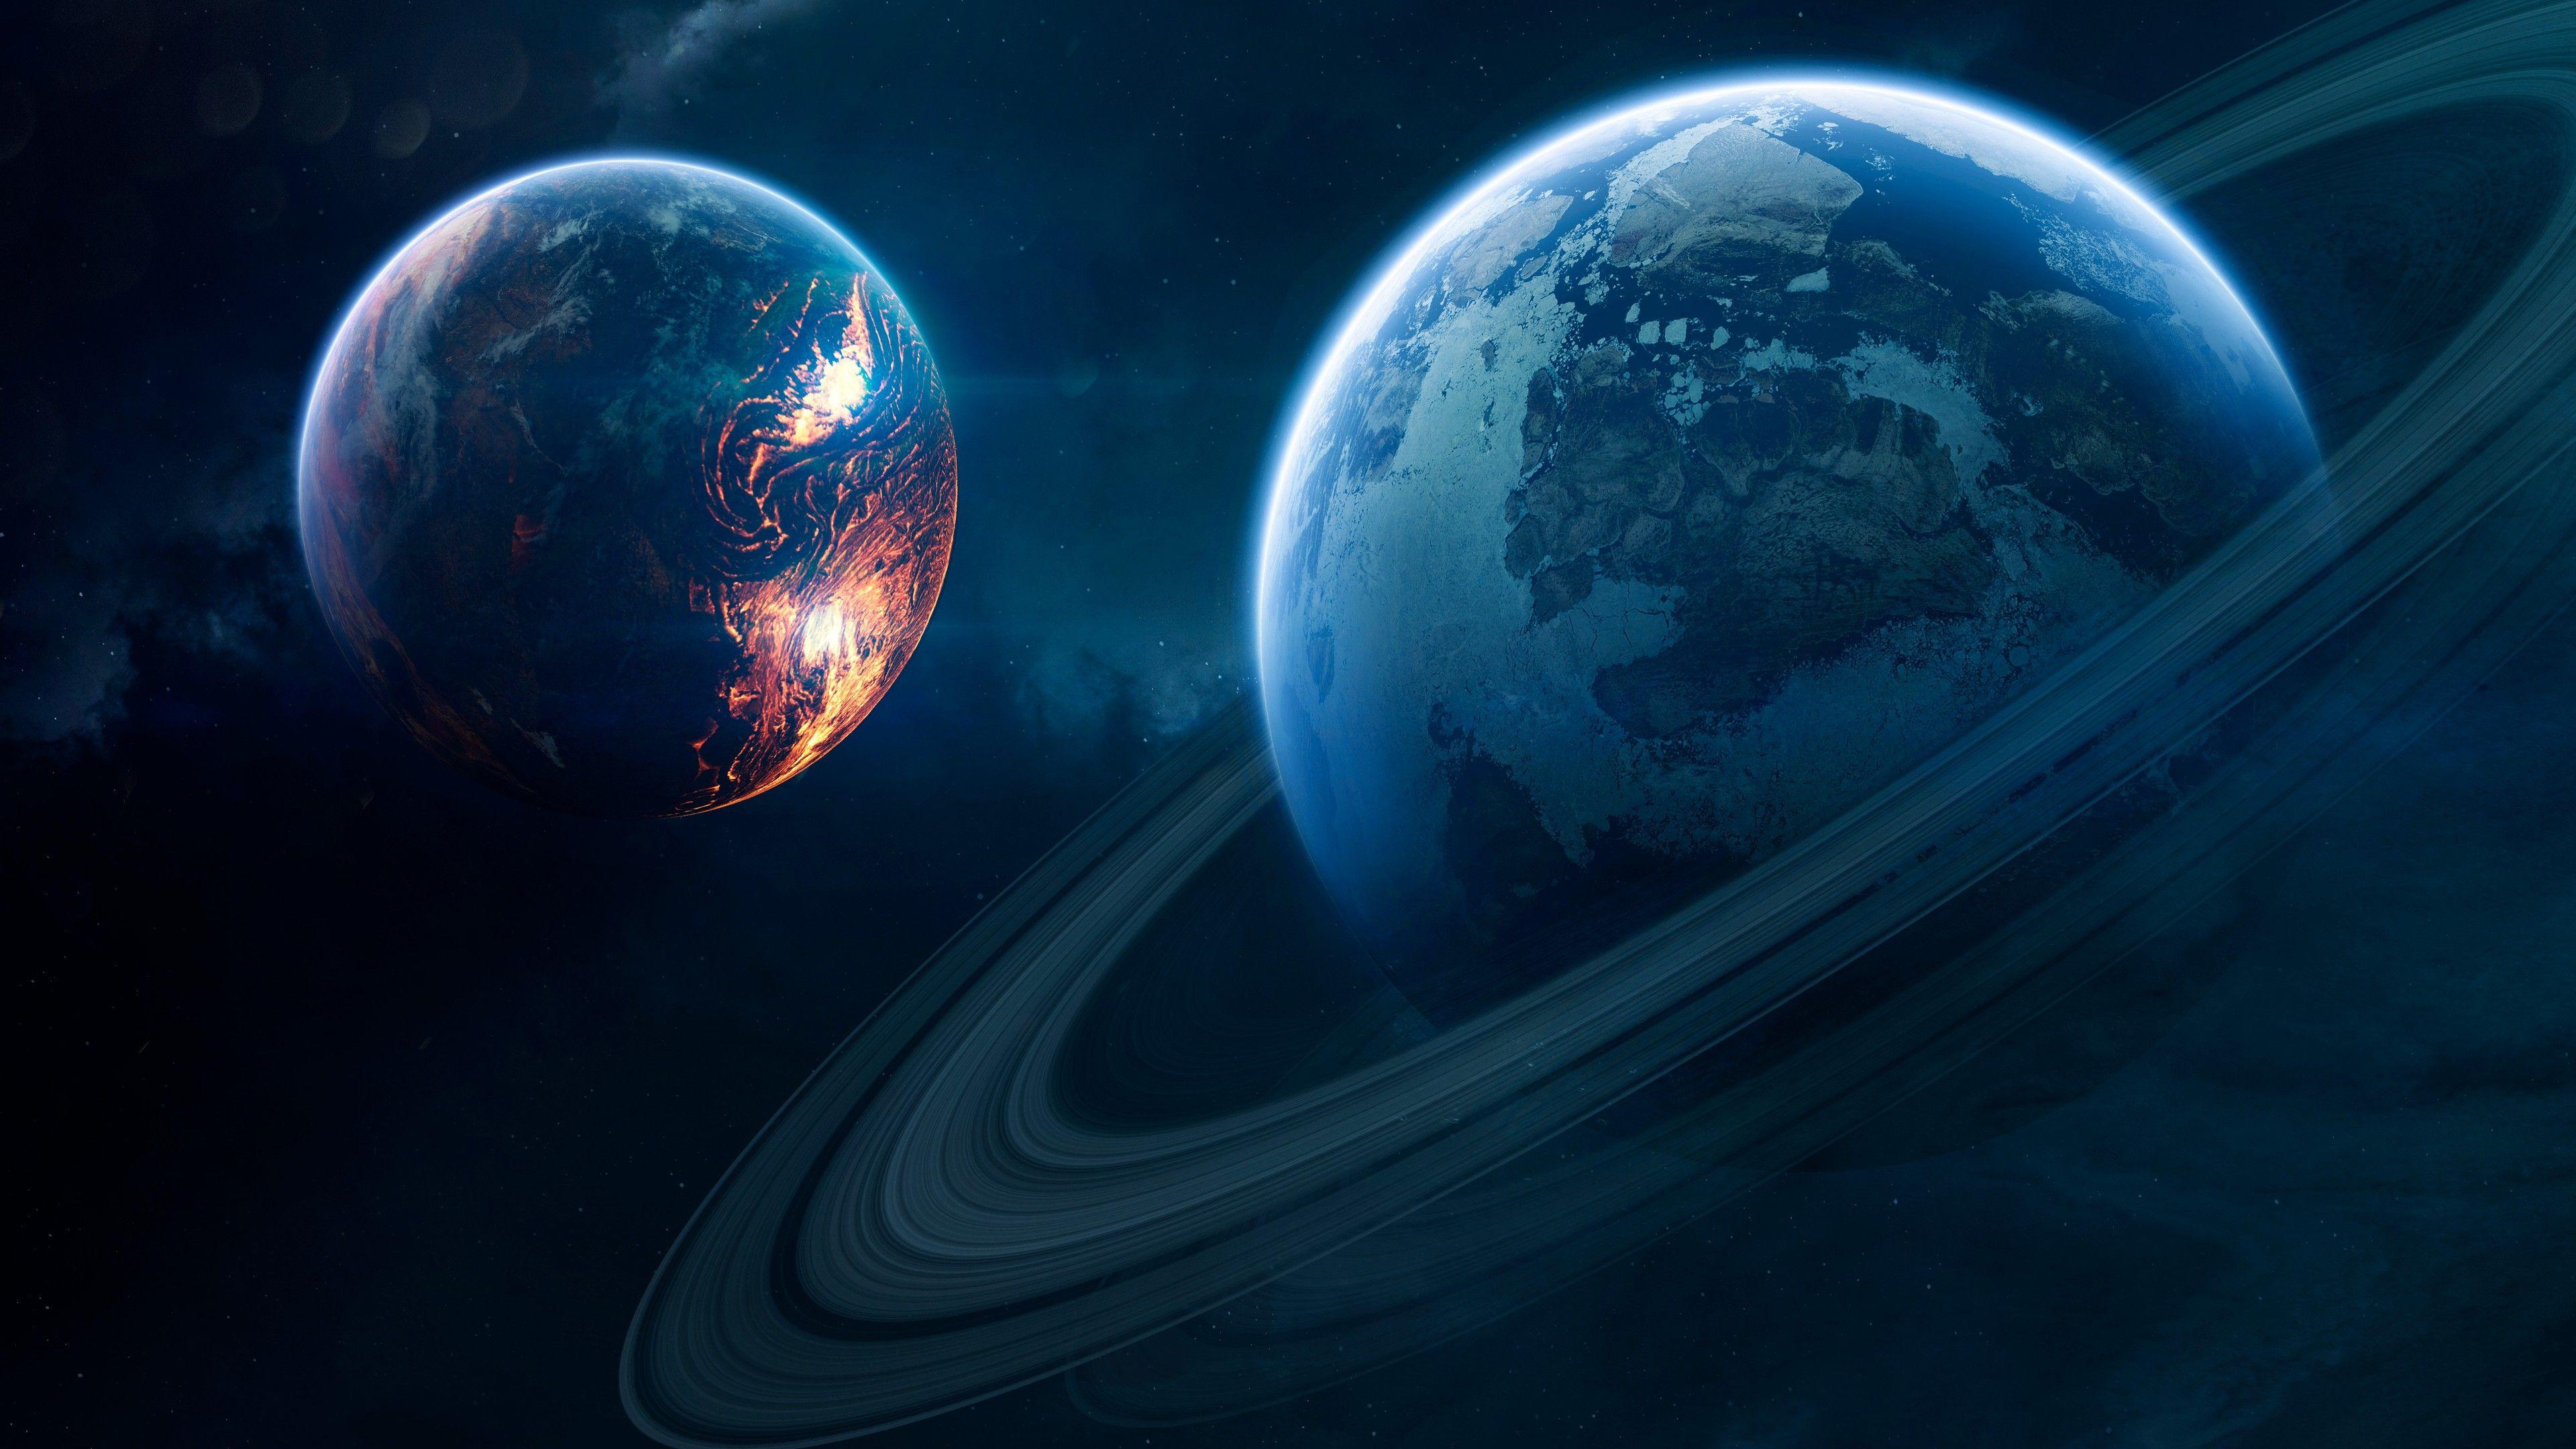 Deep Space Planets Wallpapers Top Free Deep Space Planets Backgrounds Wallpaperaccess 8934